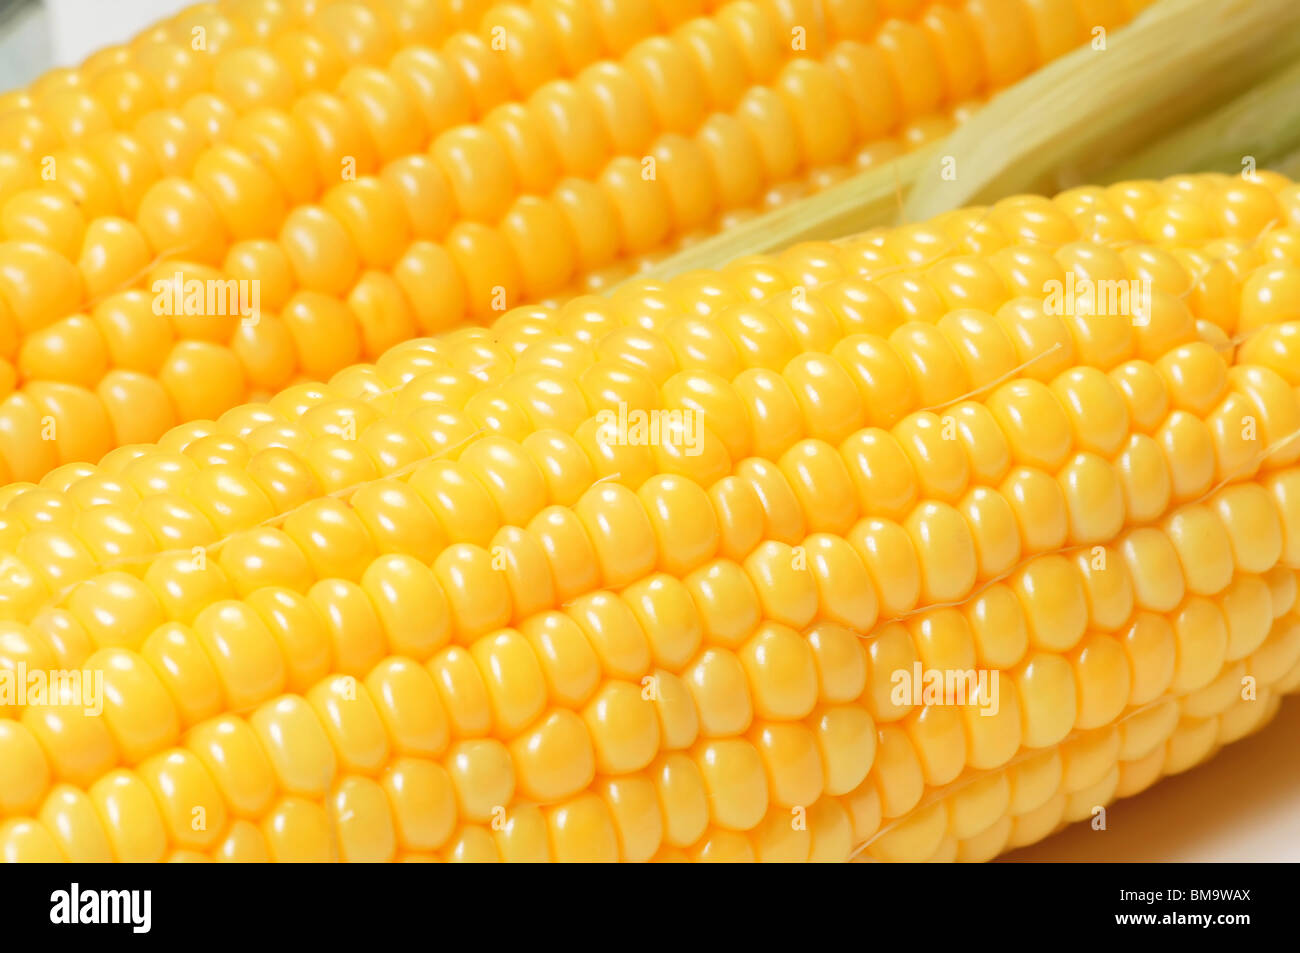 Corn cob closeup view for background or texture Stock Photo